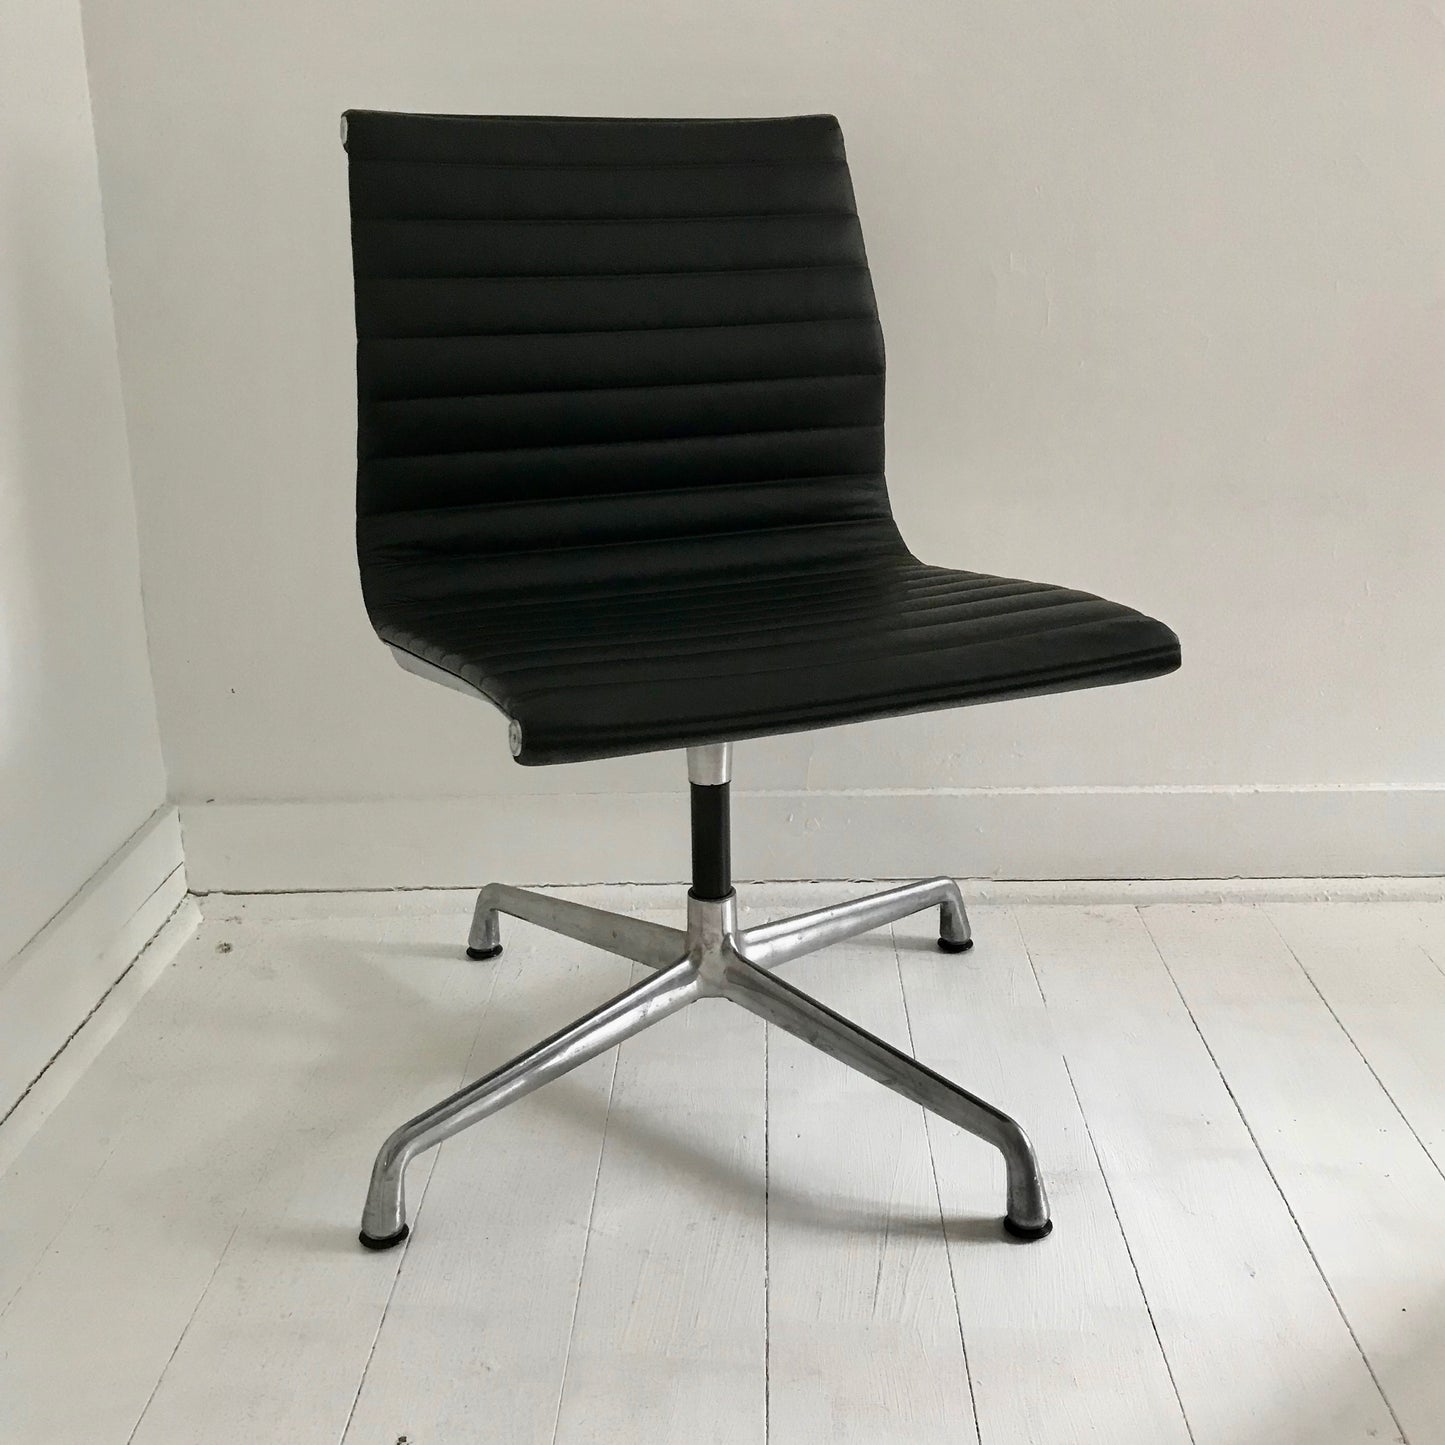 Eames Armless Group Side Chair by Herman Miller (4 available)